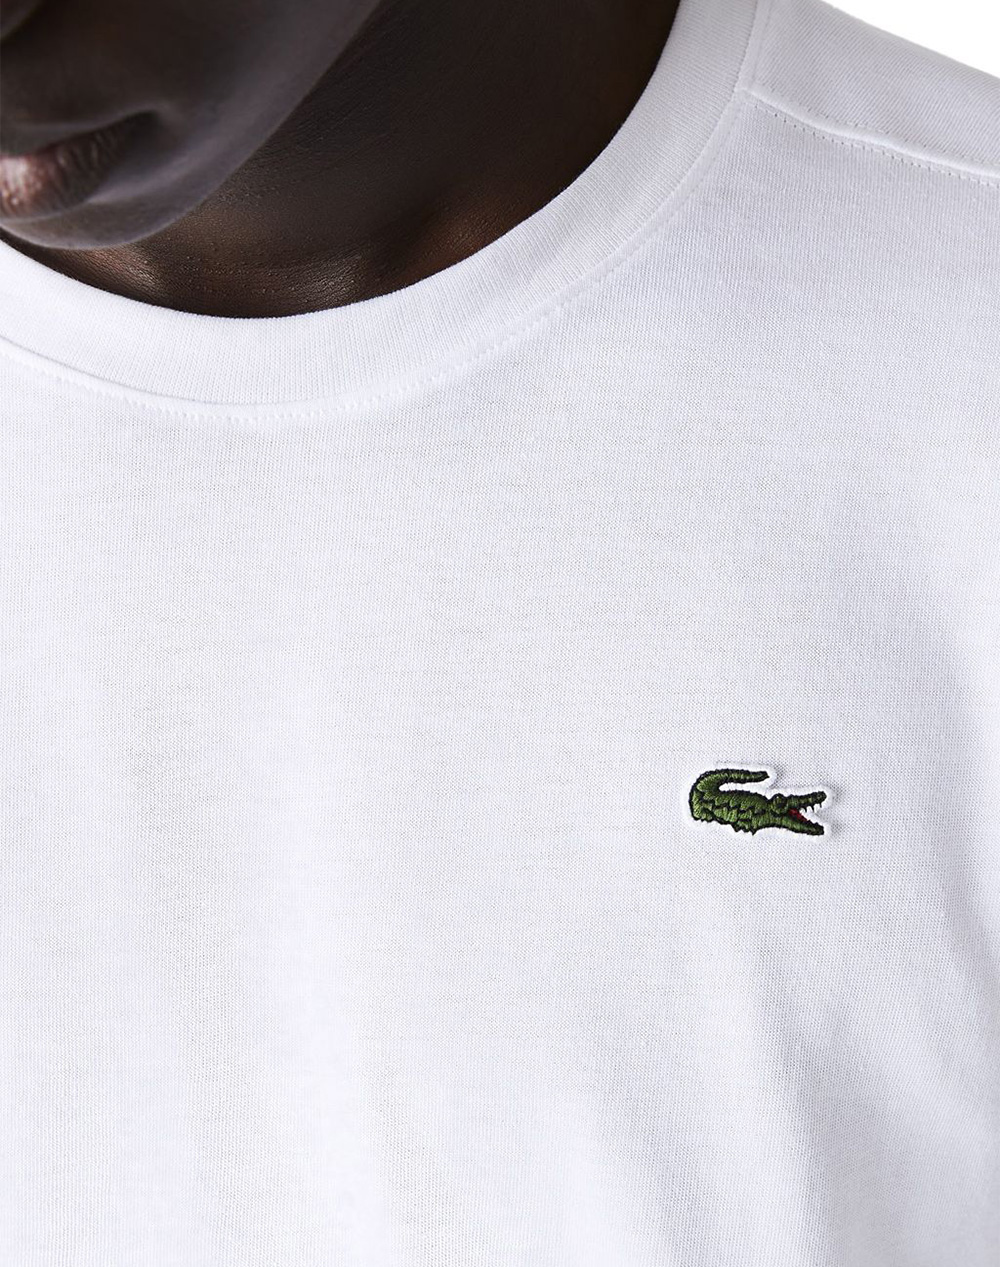 LACOSTE TEE-SHIRT SS